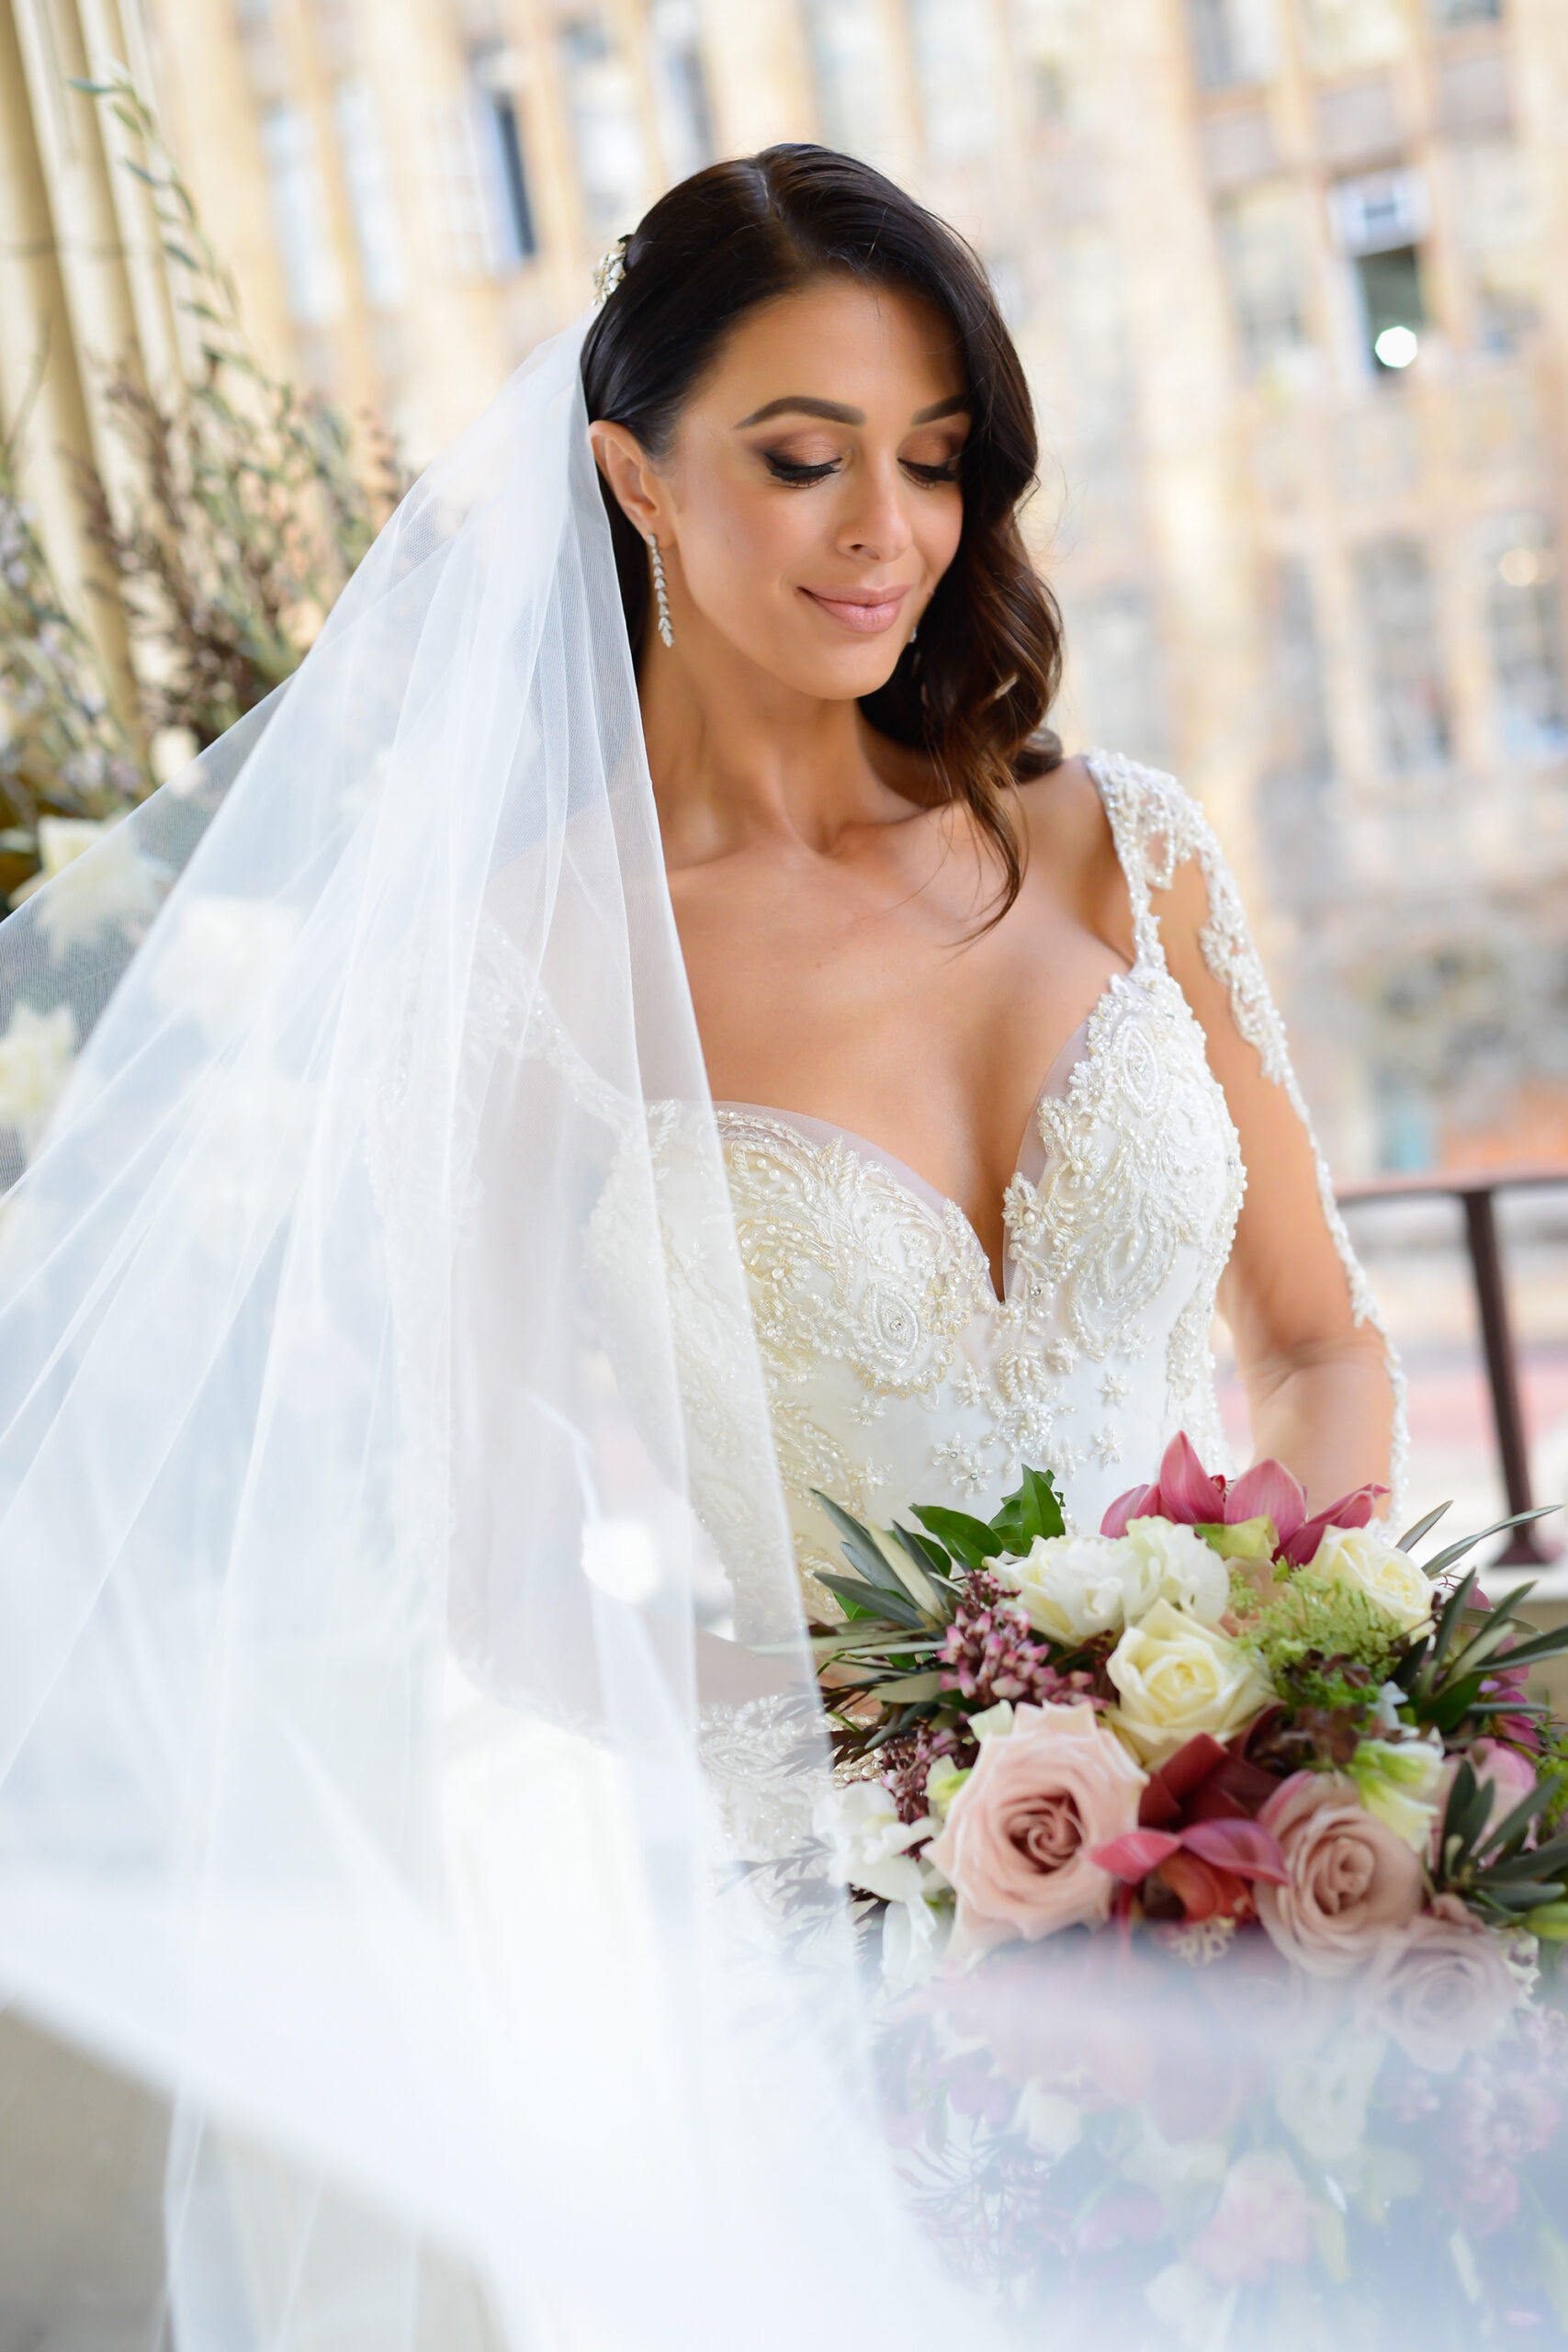 Emily Pierre Modern Glam Wedding ATEIA Photography SBS 019 scaled